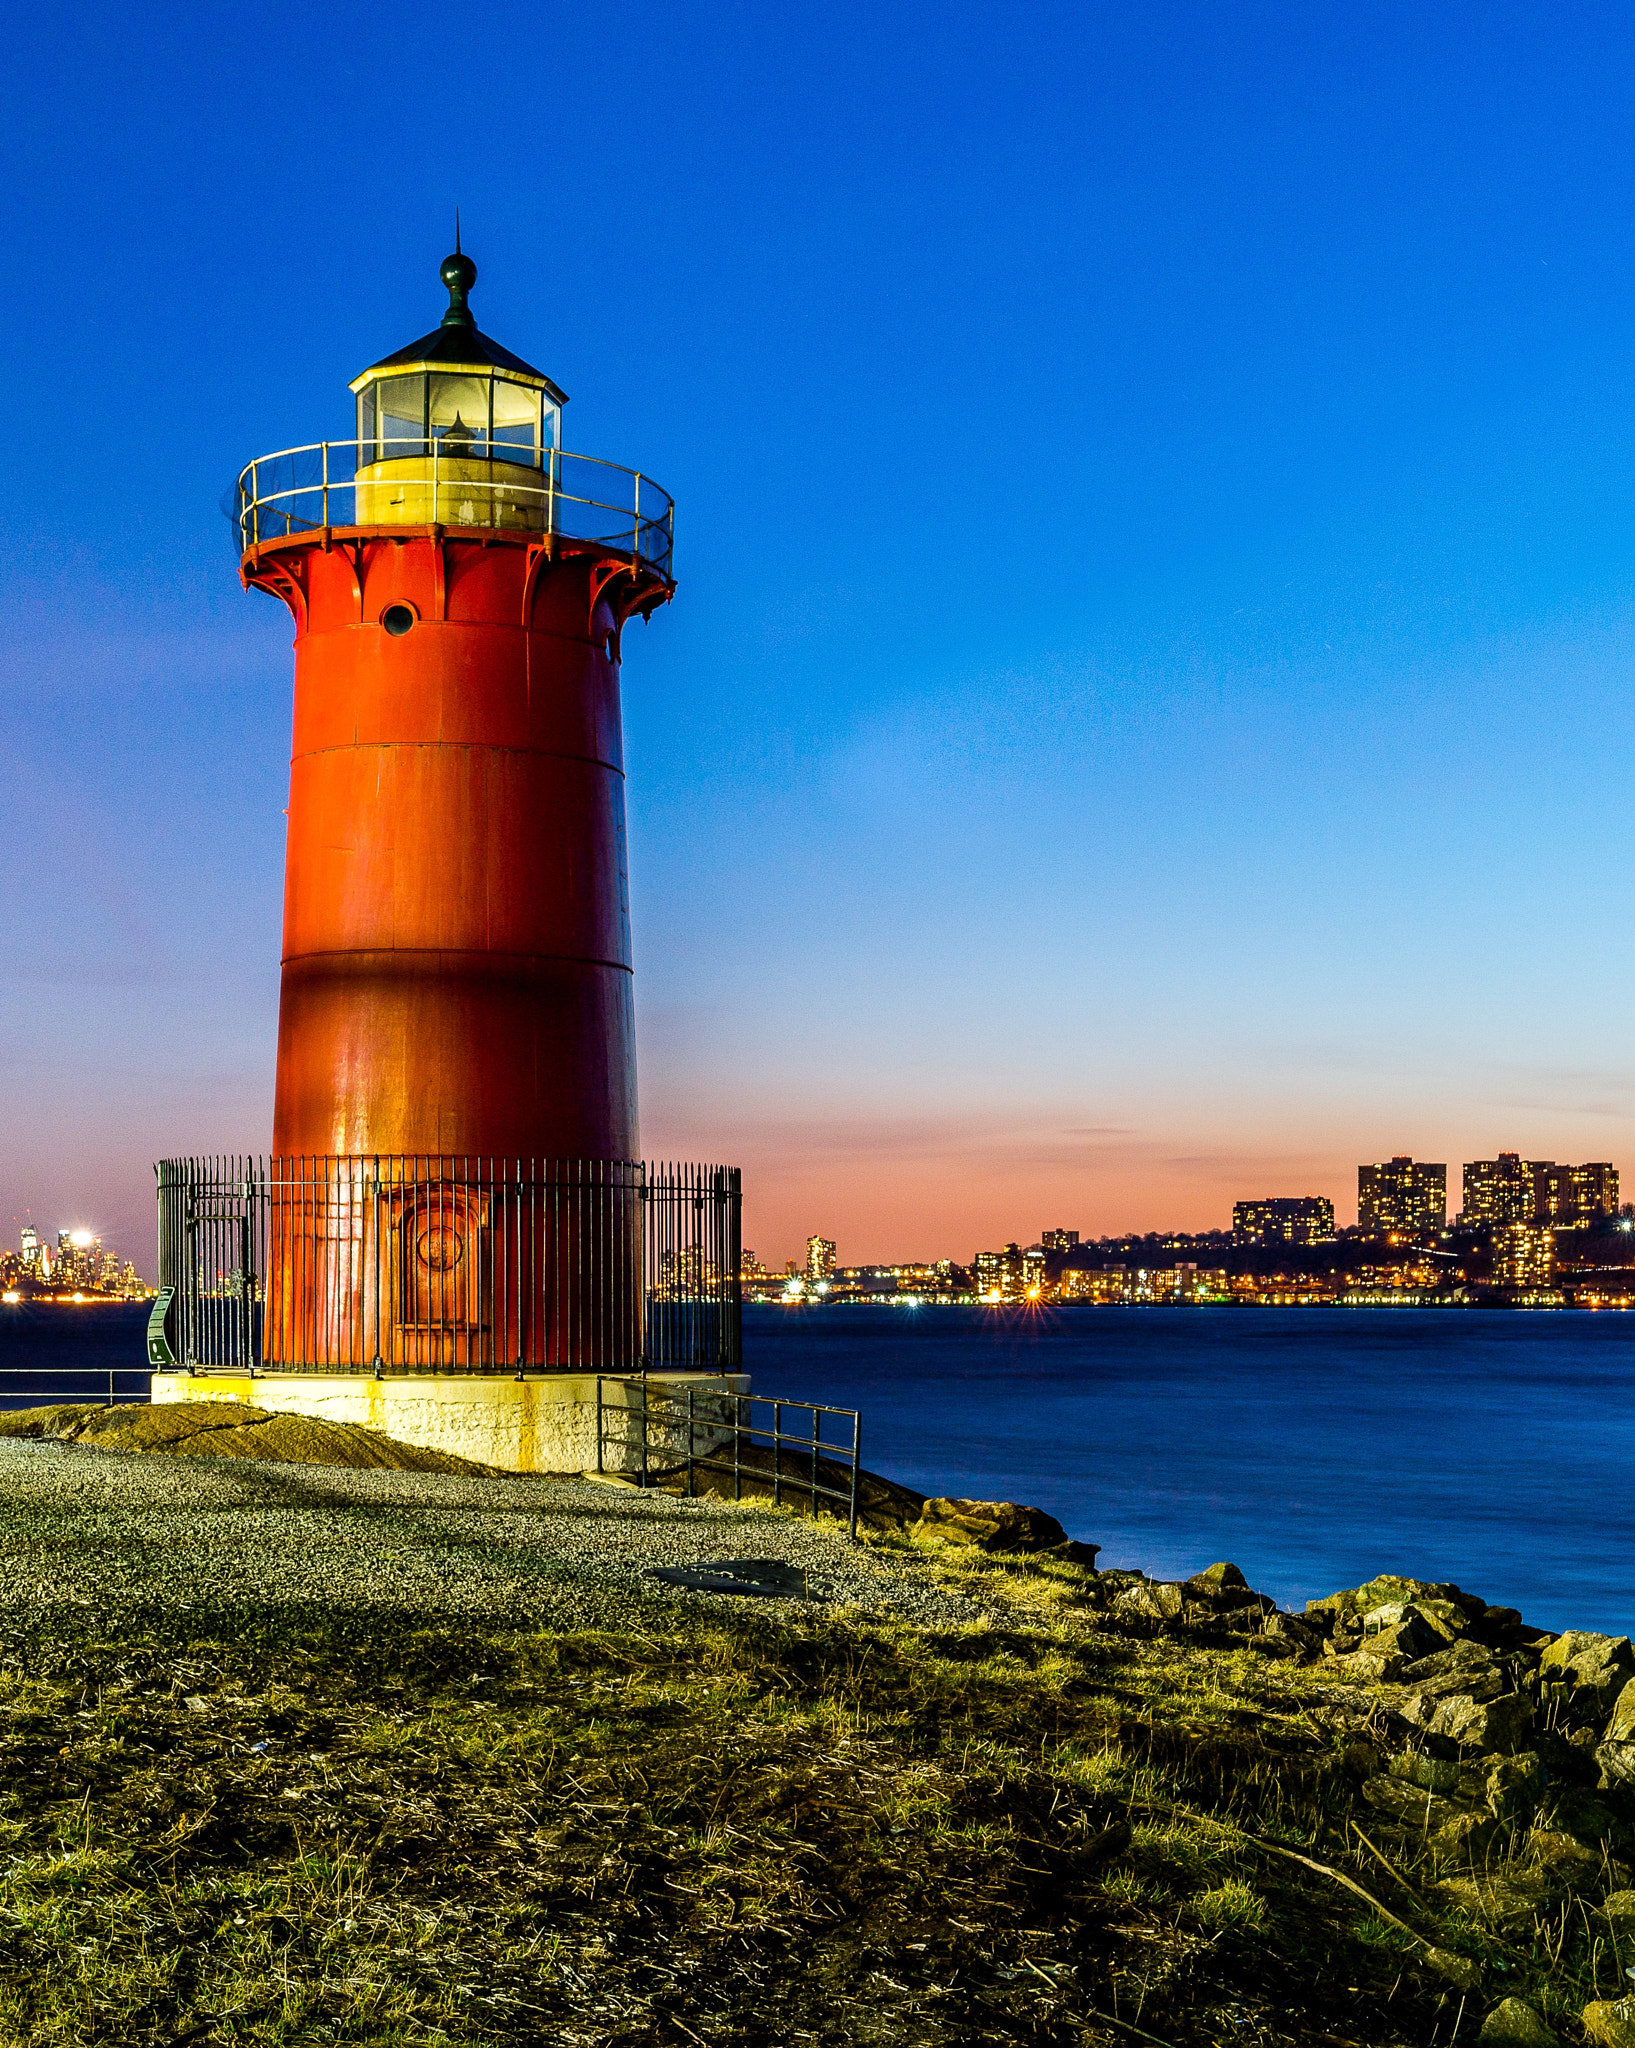 Sony a99 II sample photo. The little red light house nyc photography